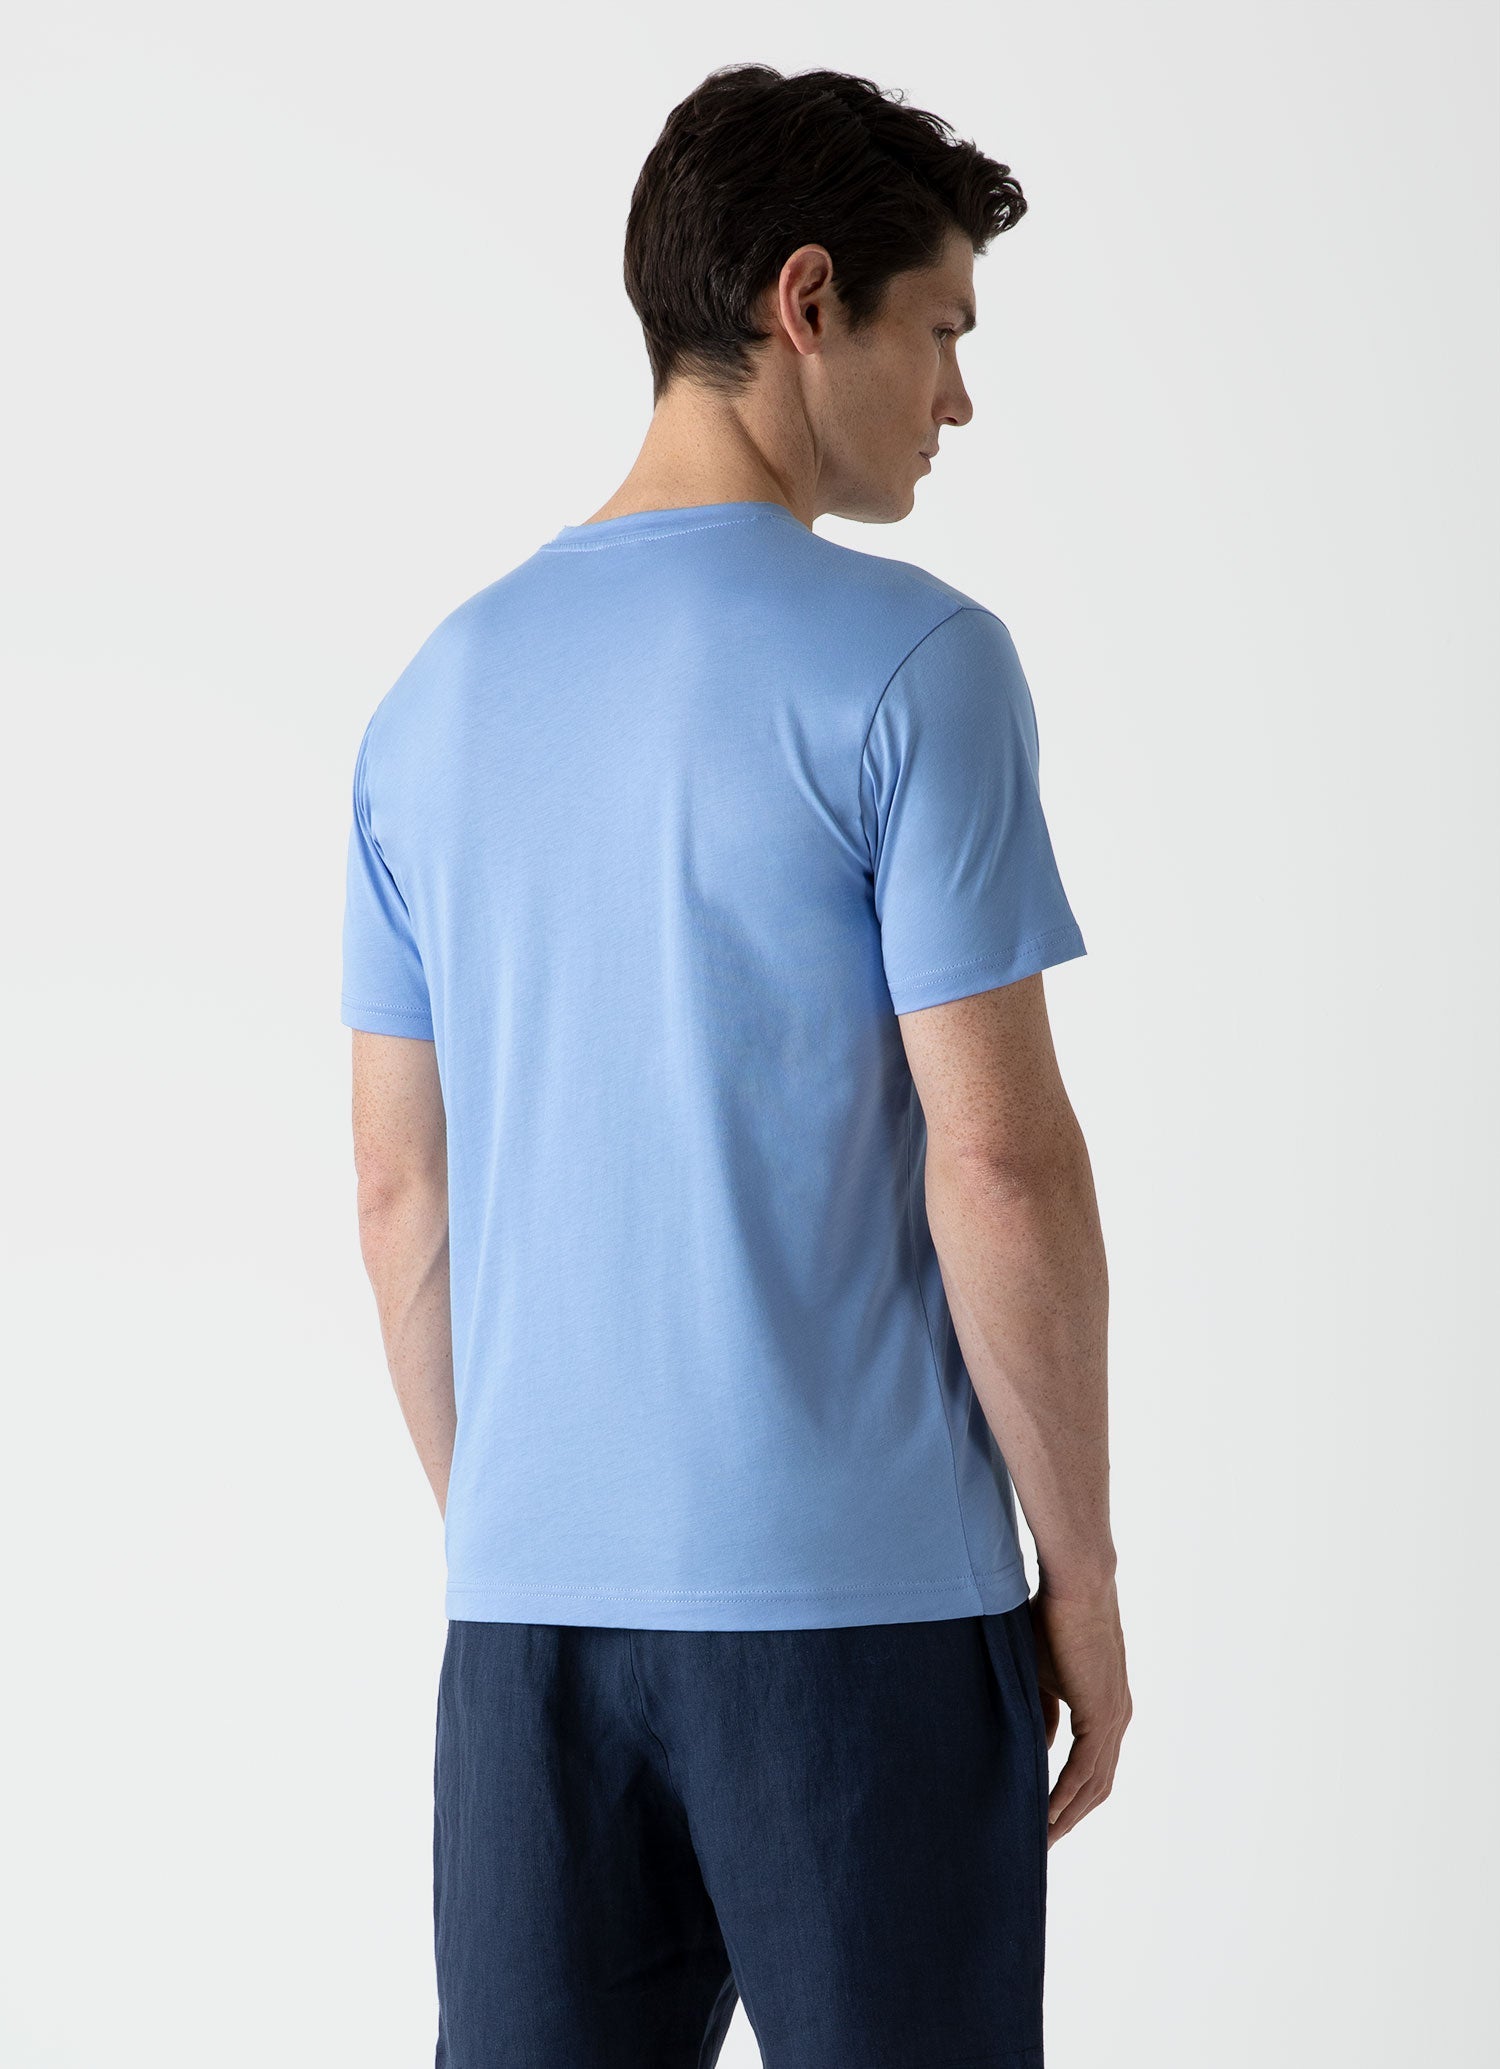 Men's Riviera T‑shirt in Cool Blue